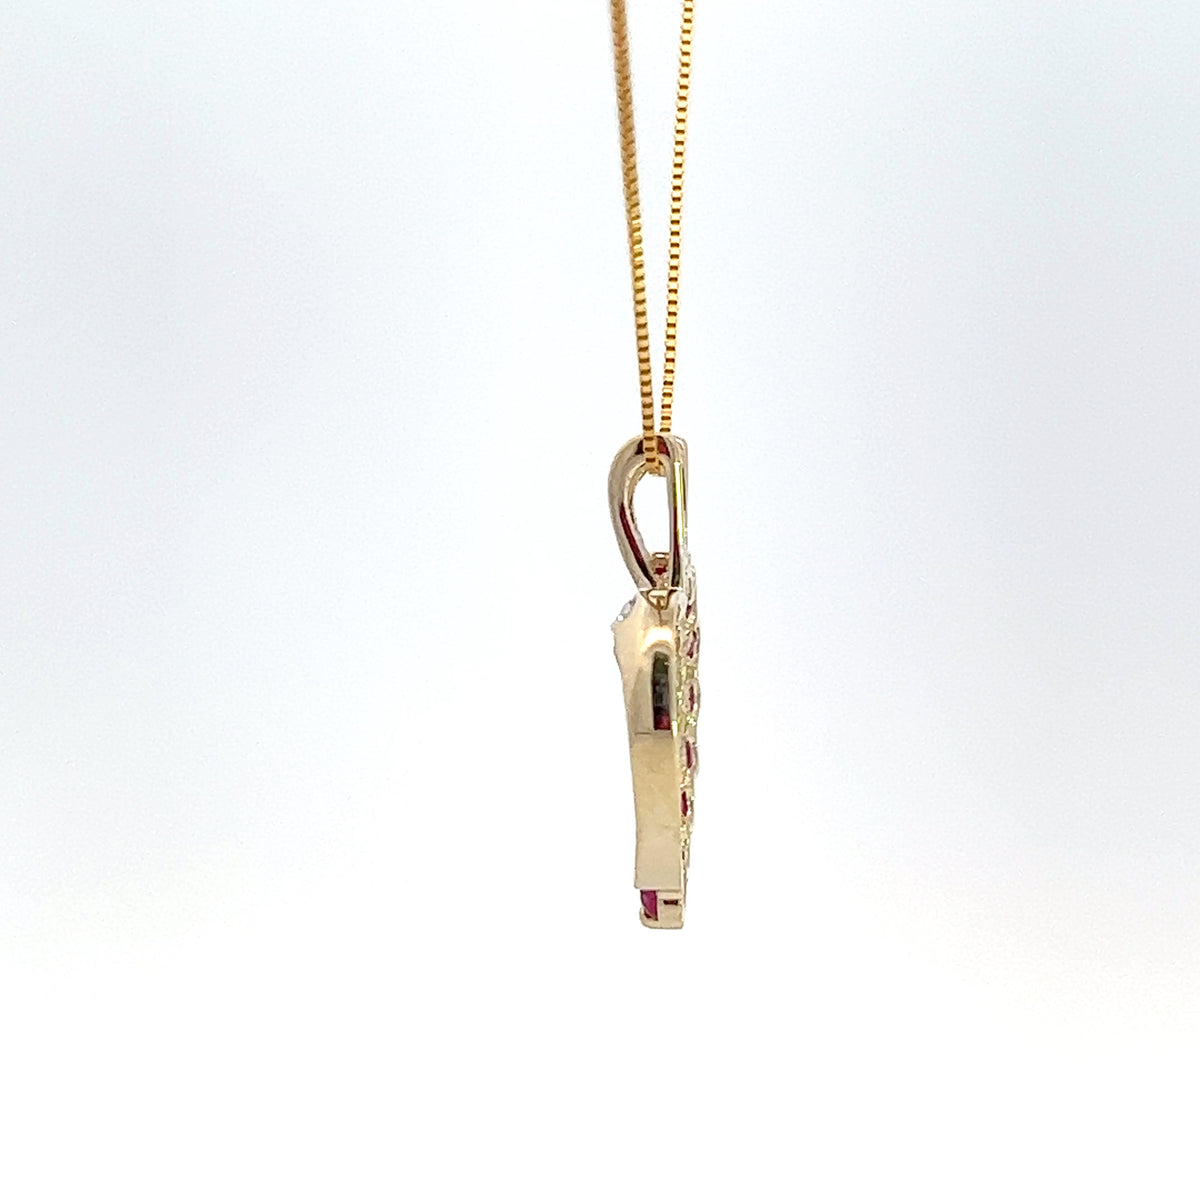 10K Yellow Gold 0.03 cttw Diamond and Ruby Heart Pendant, 18&quot;